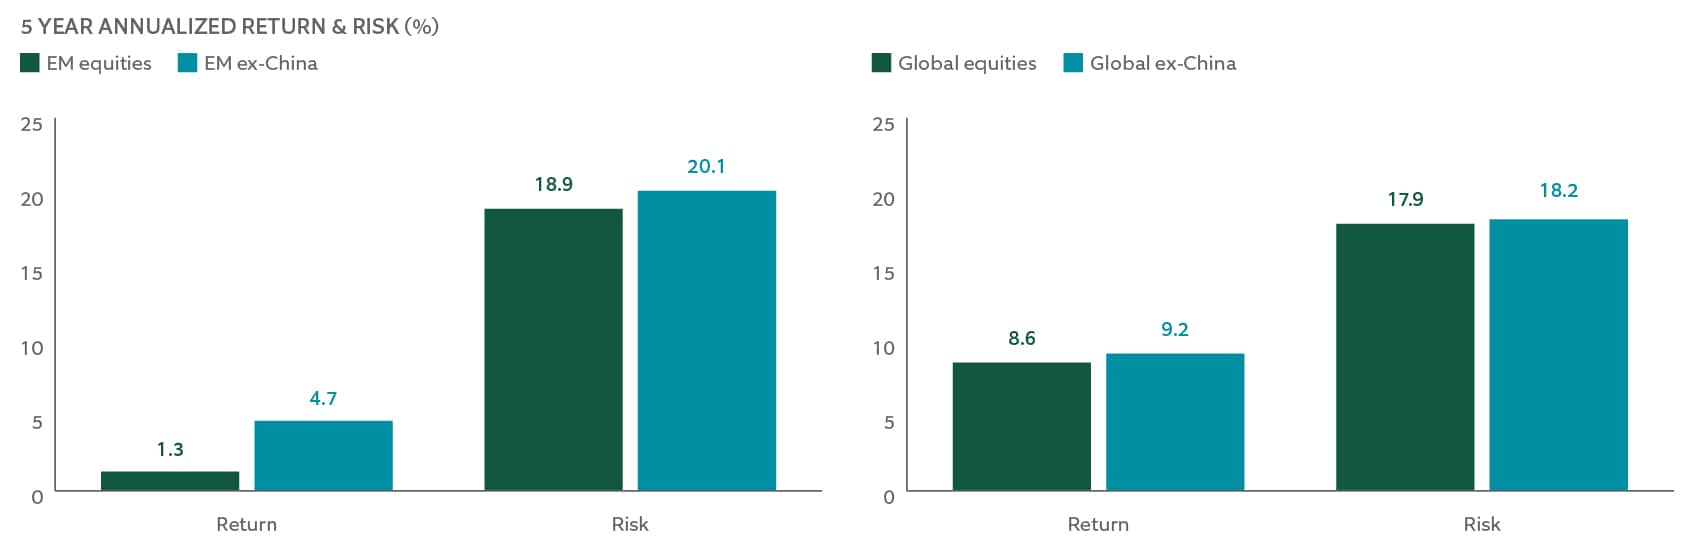 5 year annualized return and risk %